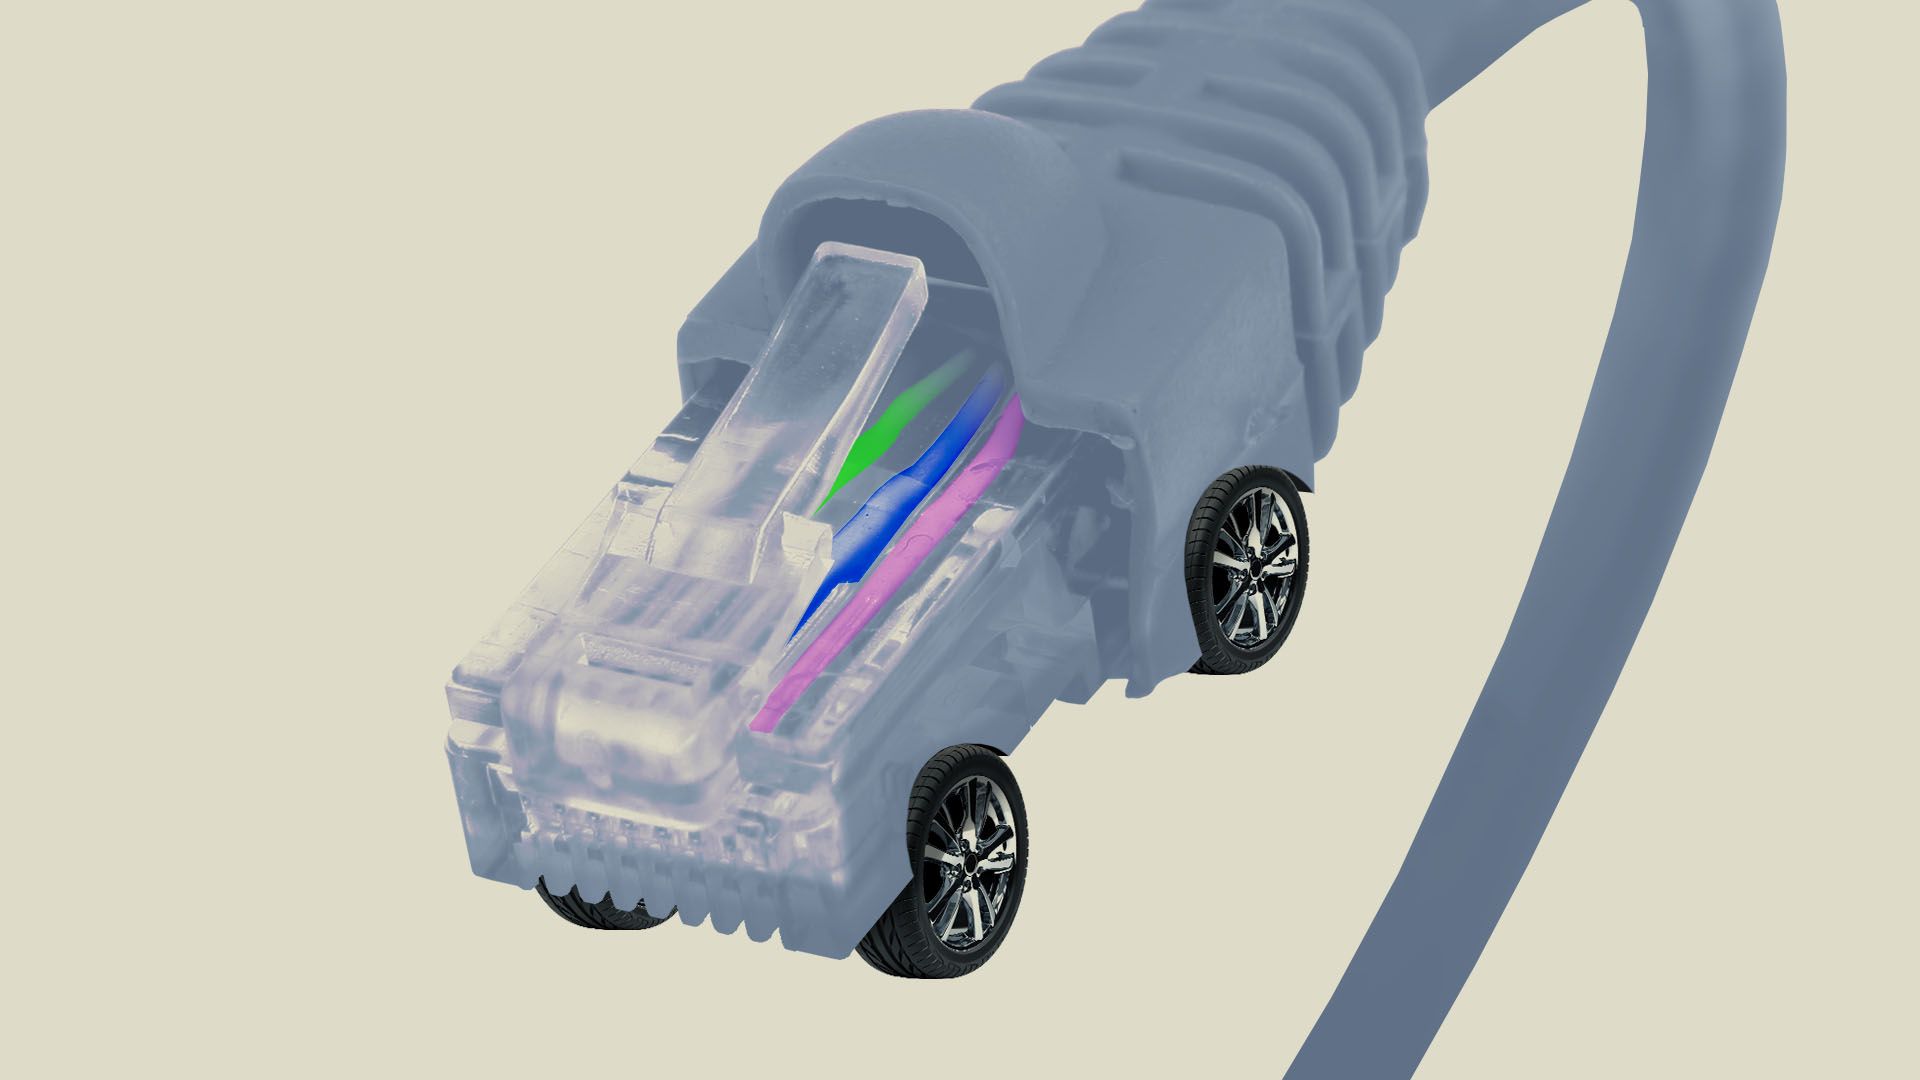 Illustration of an ethernet cable with car wheels